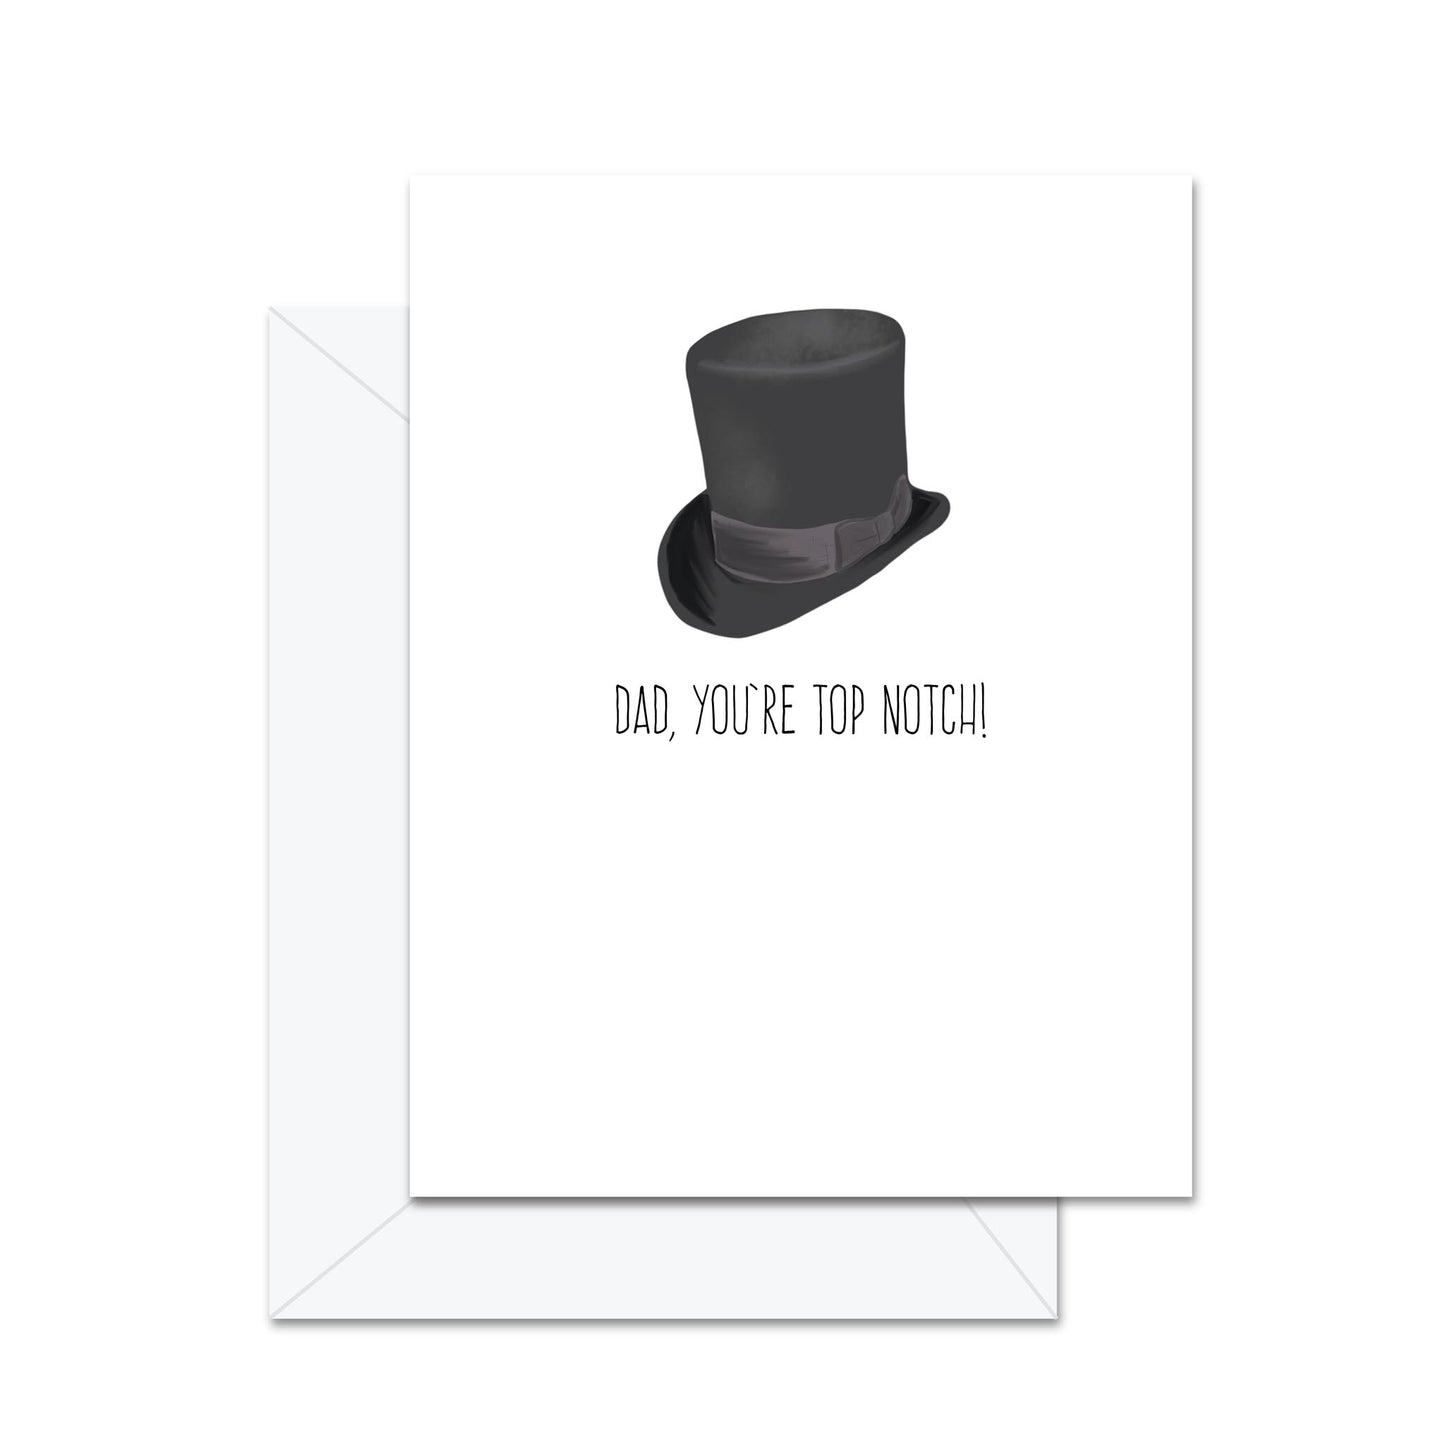 Dad, You're Top Notch! - Greeting Card